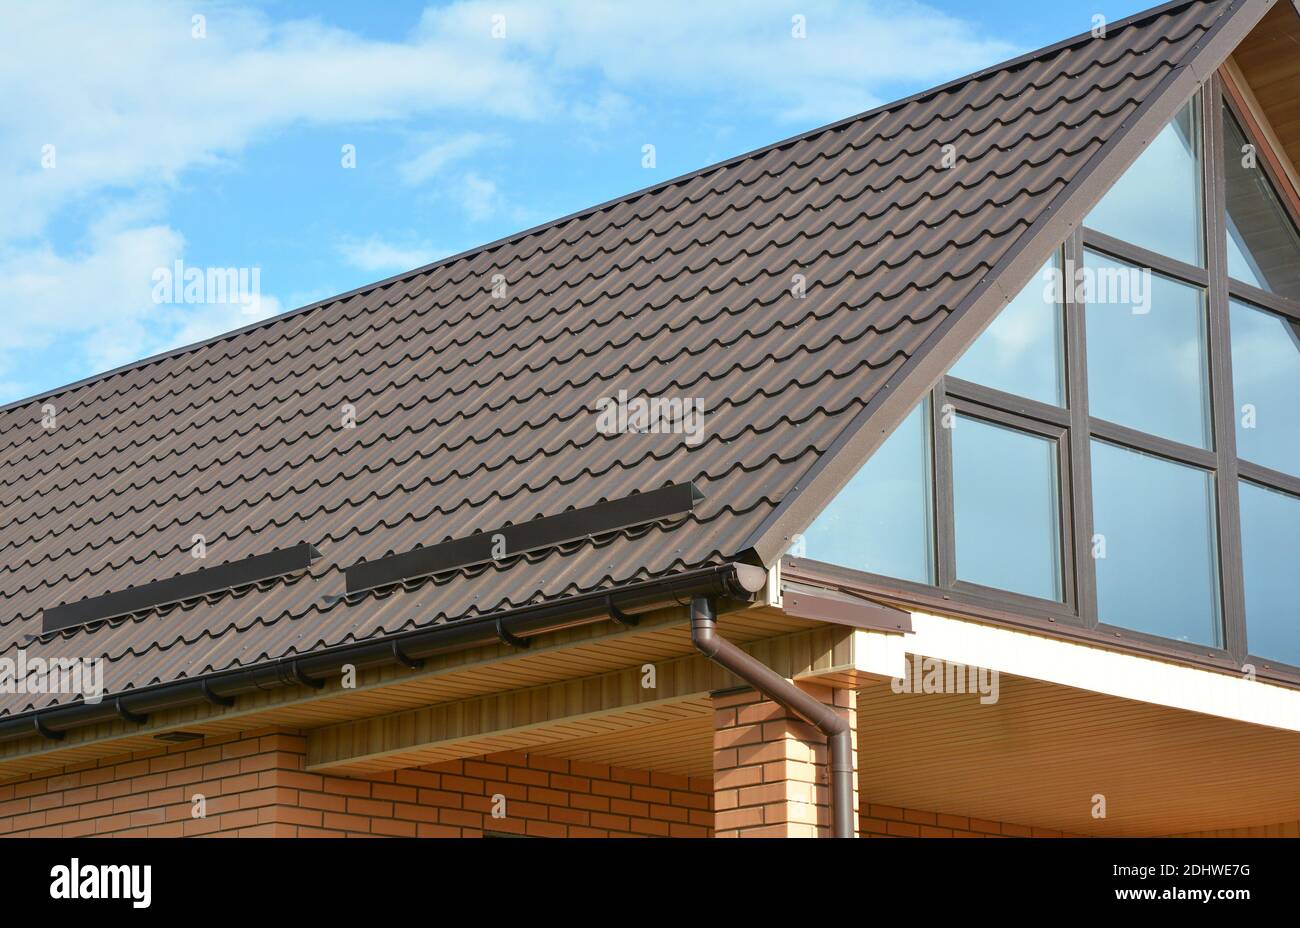 Building Modern House Construction with metal roof, rain gutter system and roof protection from snow board, snow bar, snow guards. Stock Photo